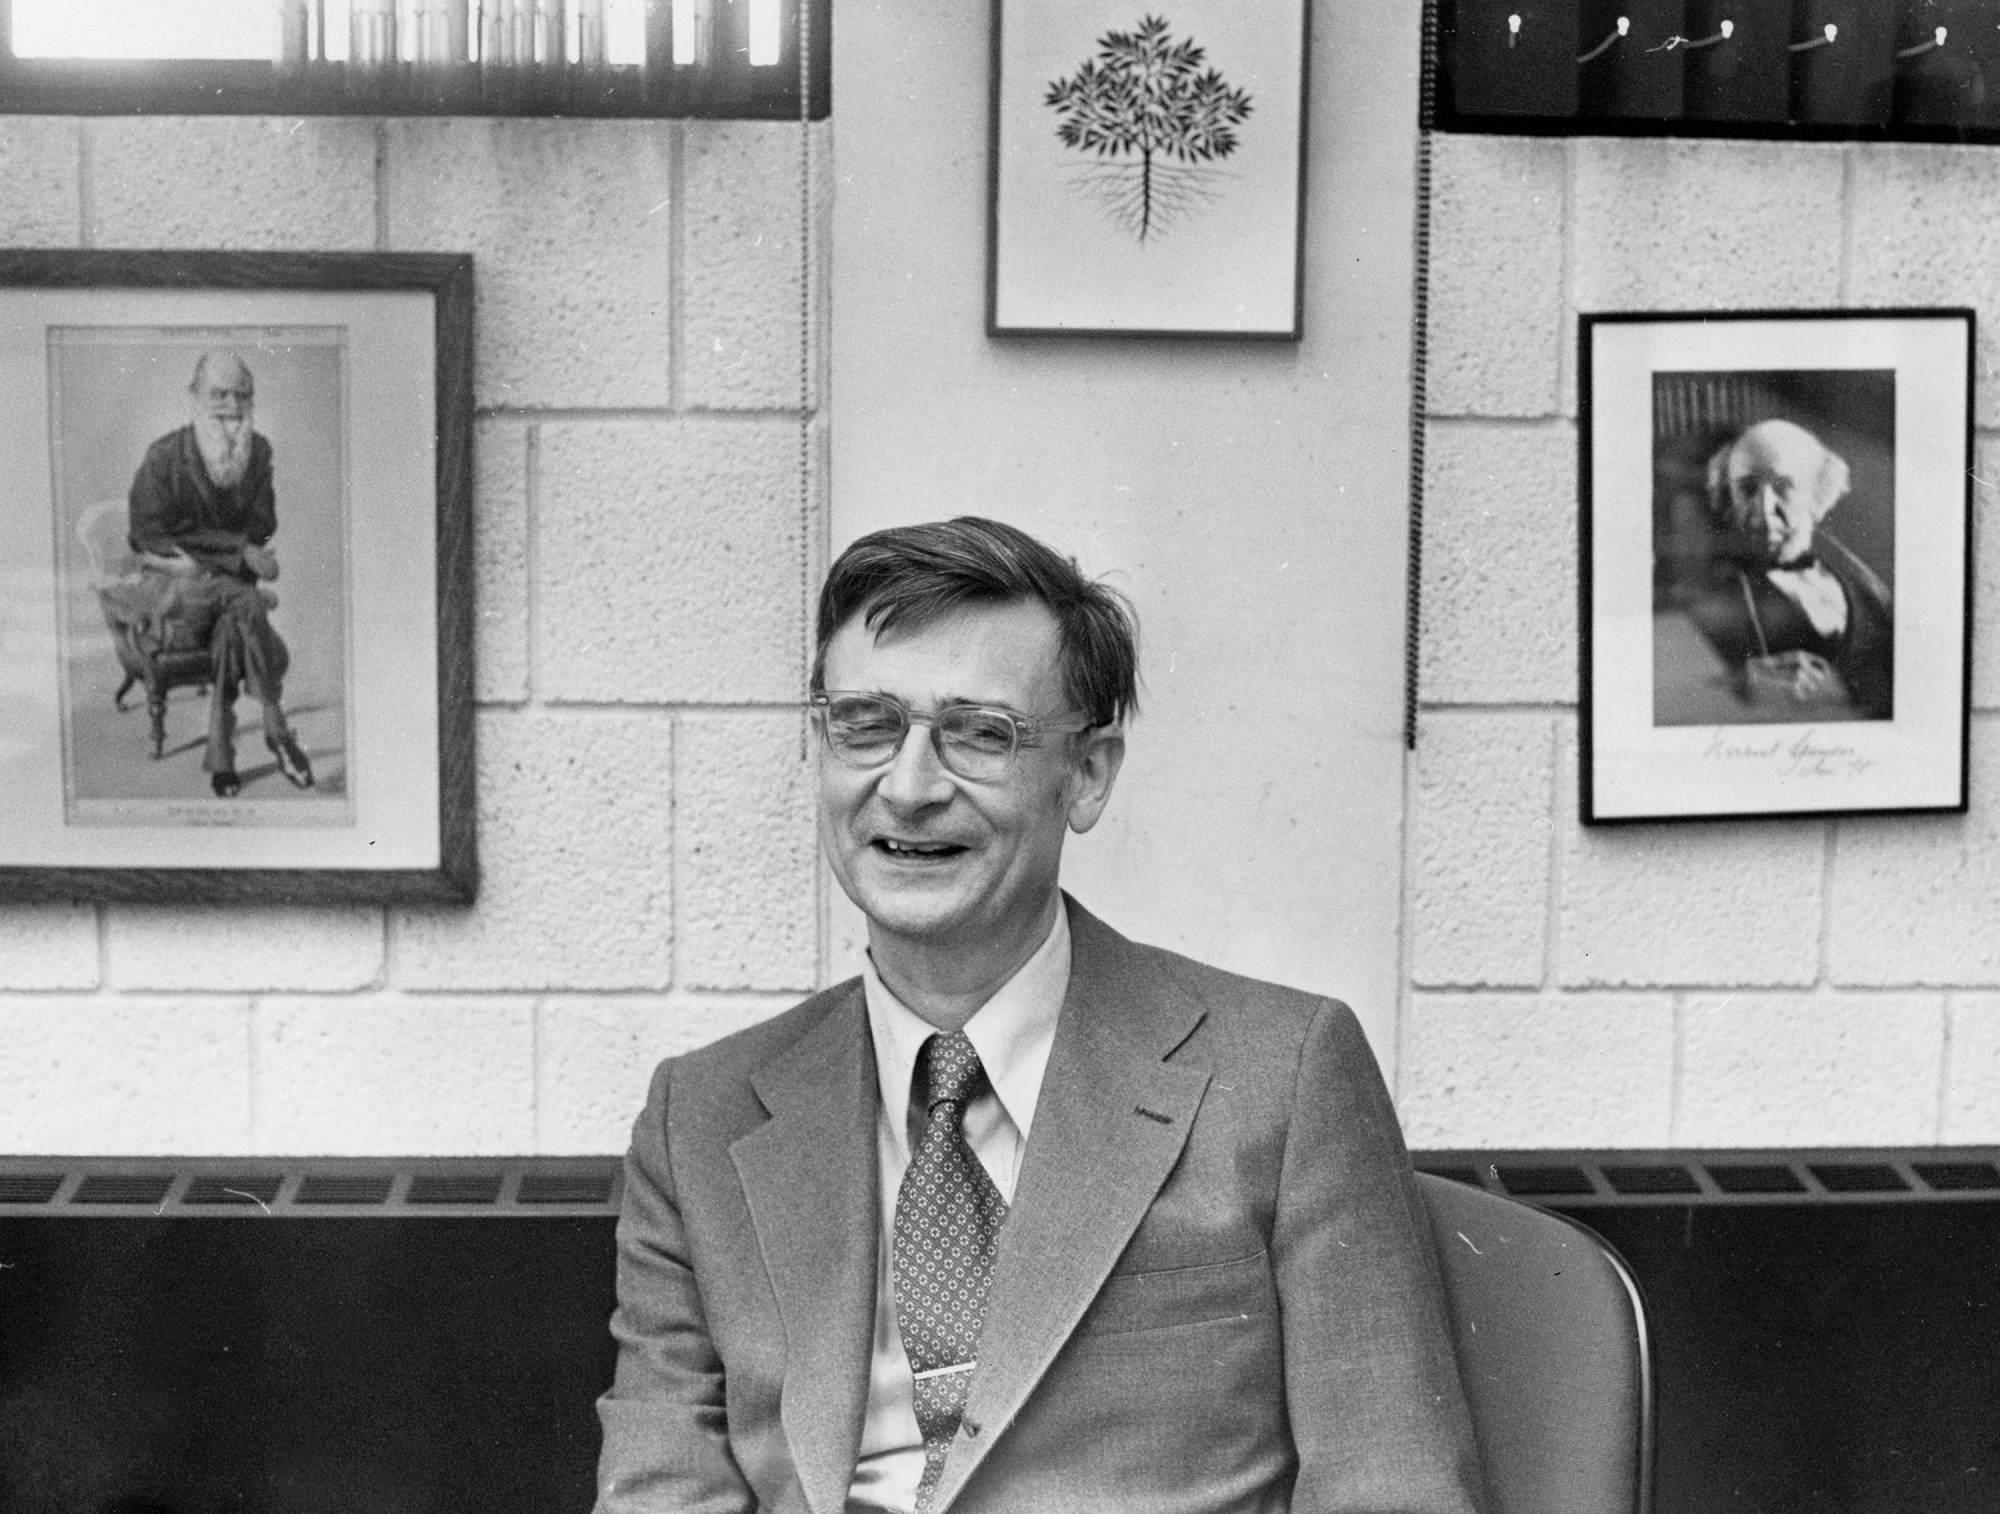 A closer look at E.O. Wilson’s archives reveals support for racist research